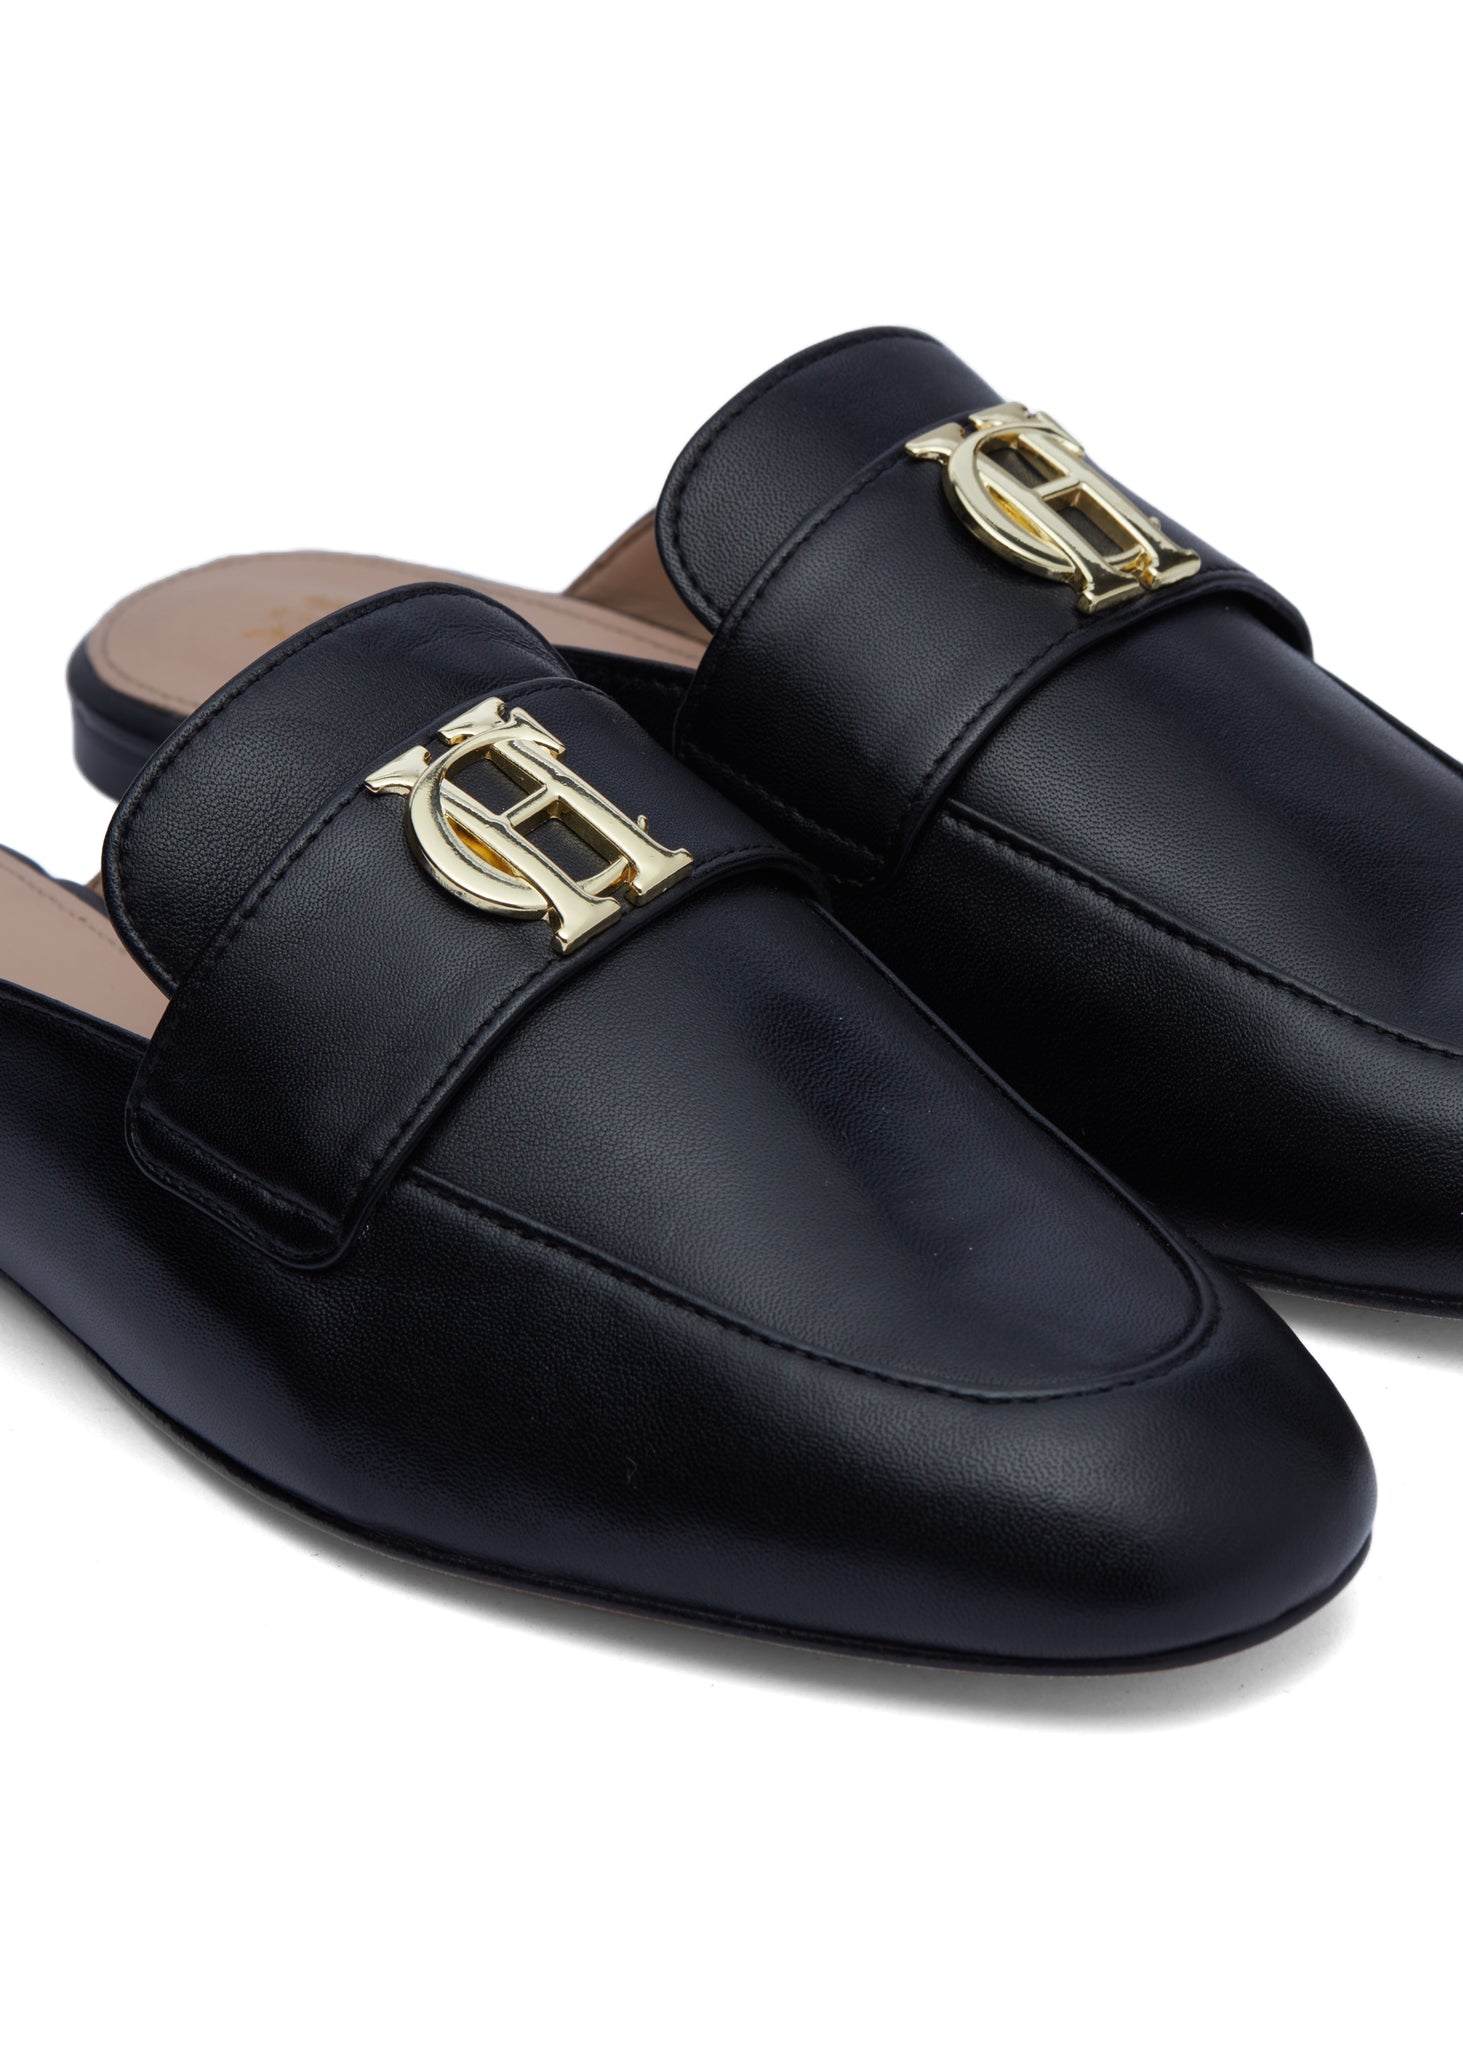 Close up of the gold hardware on black leather backless loafers with a slightly pointed toe 